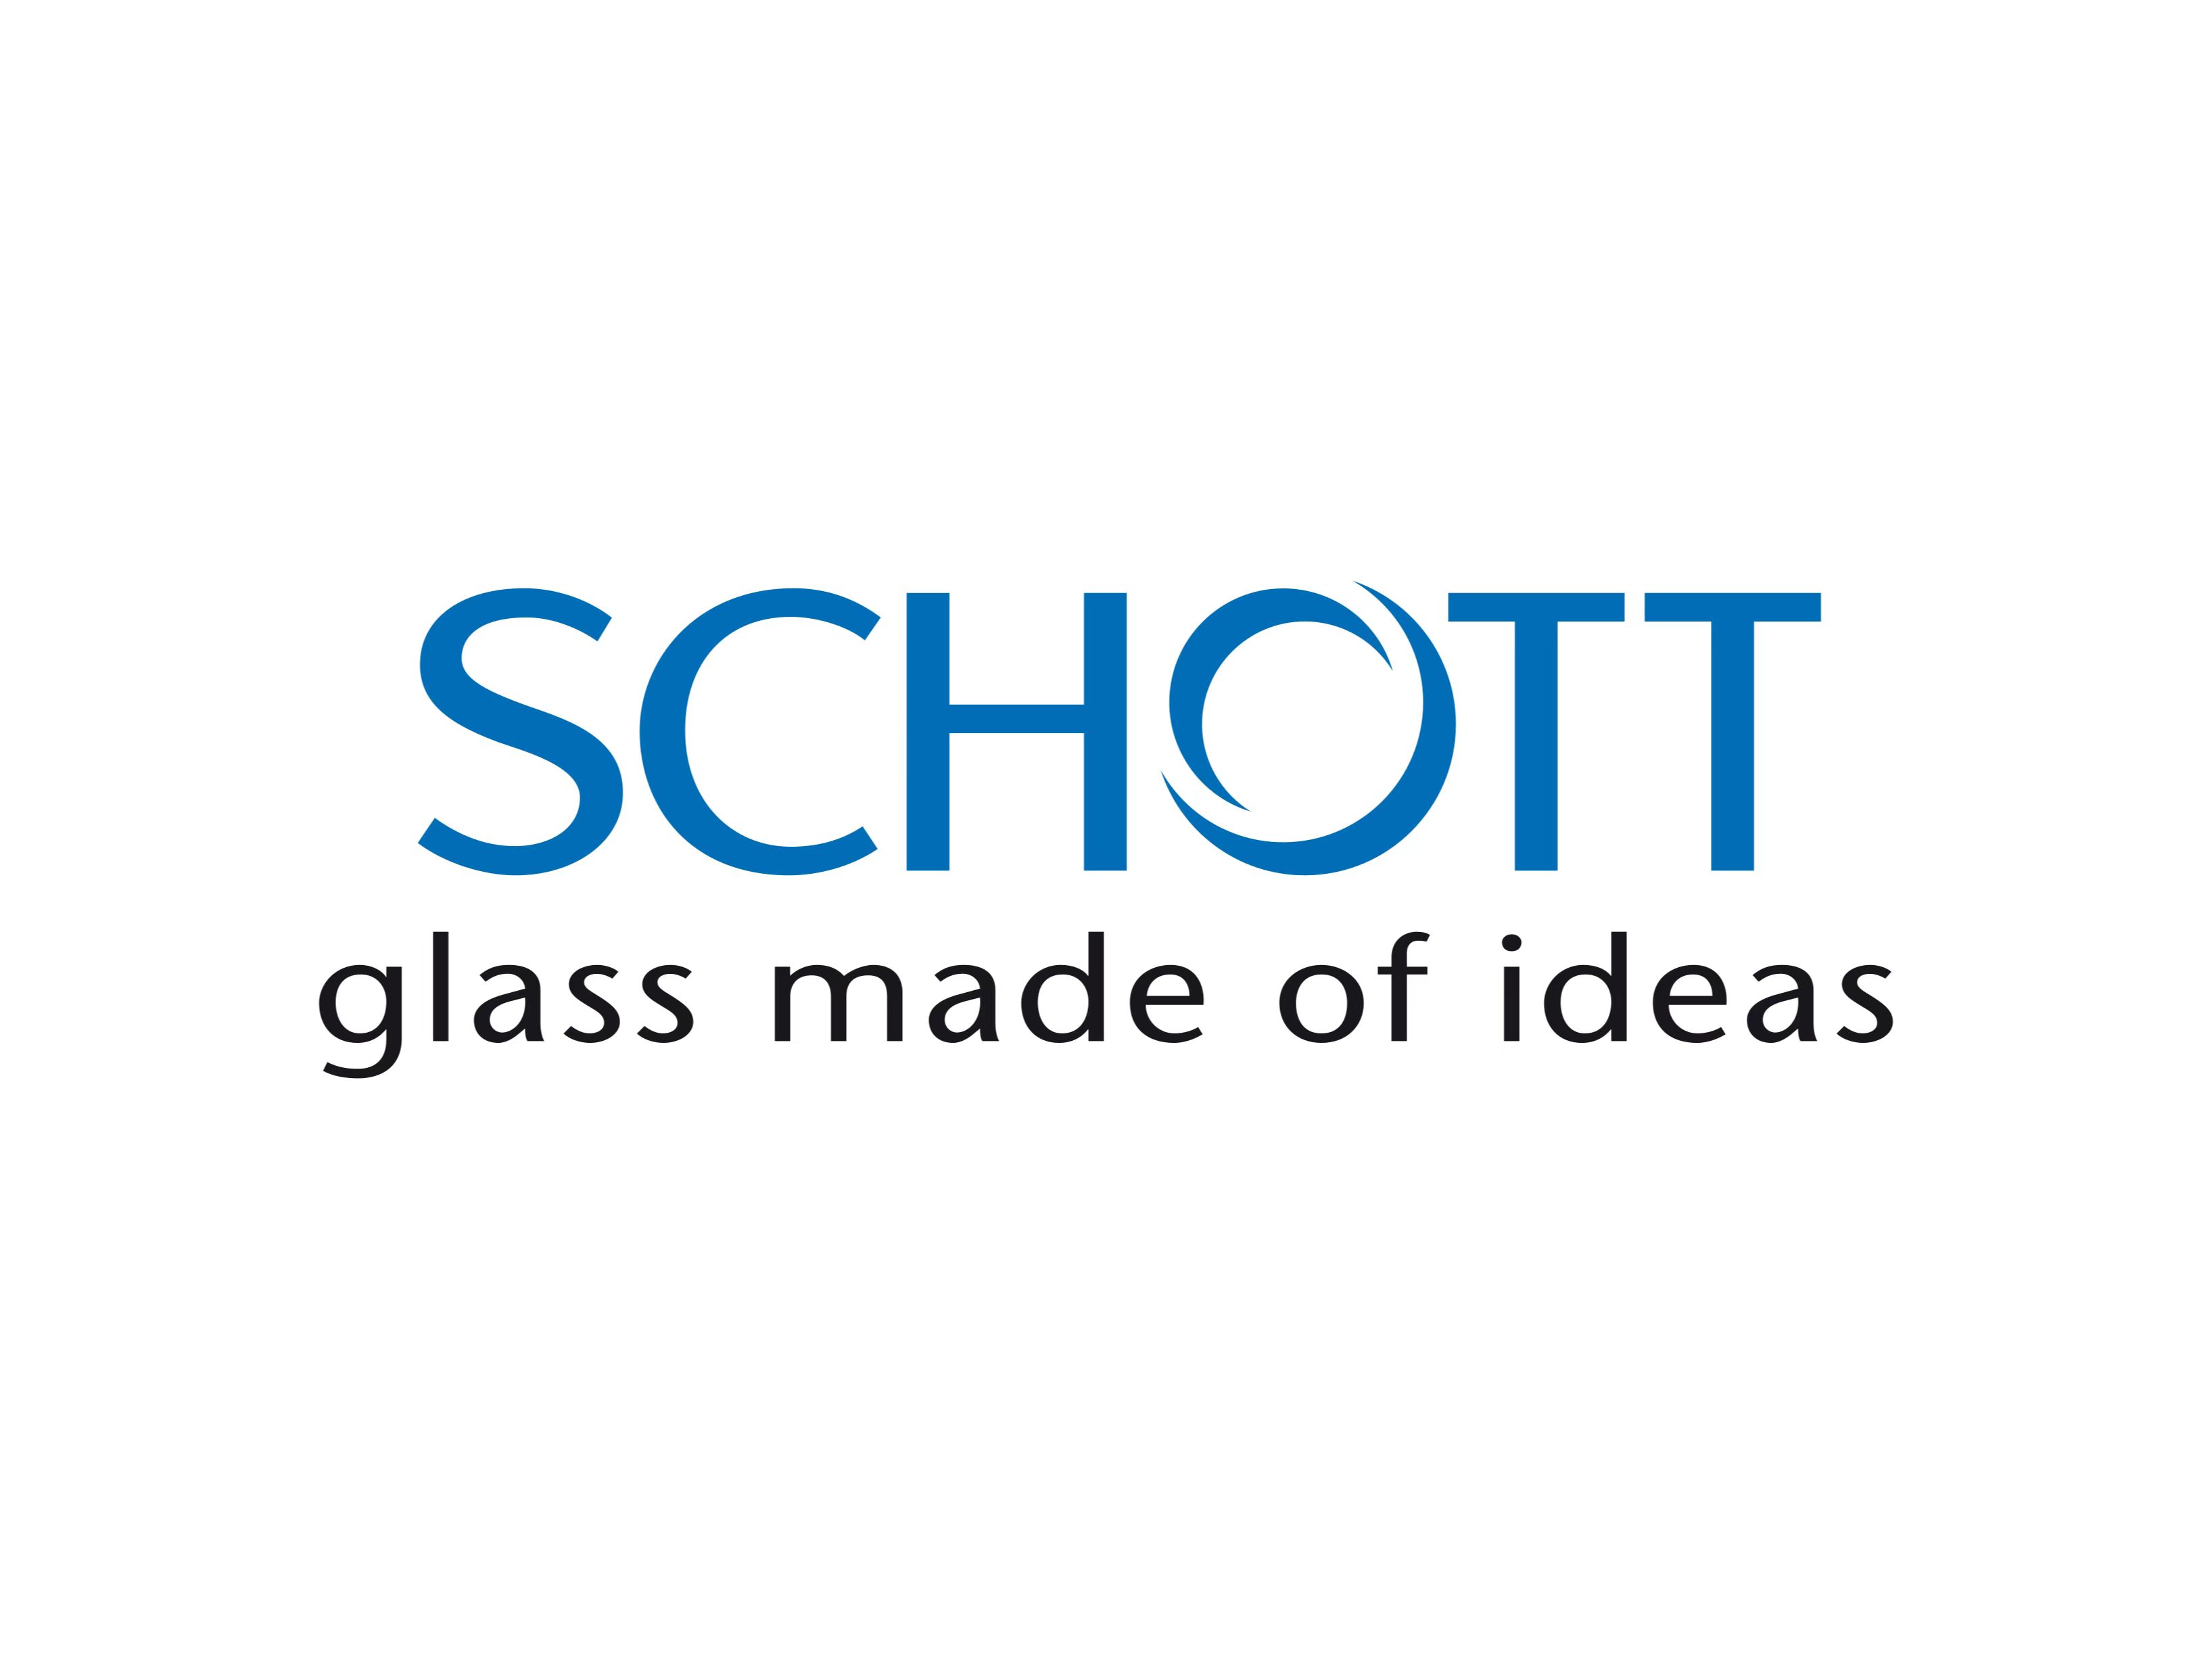 SCHOTT Opens First Facility in U.S. to Increase Capabilities and Capacity for Development and Manufacturing of Diagnostics and Life Sciences Products